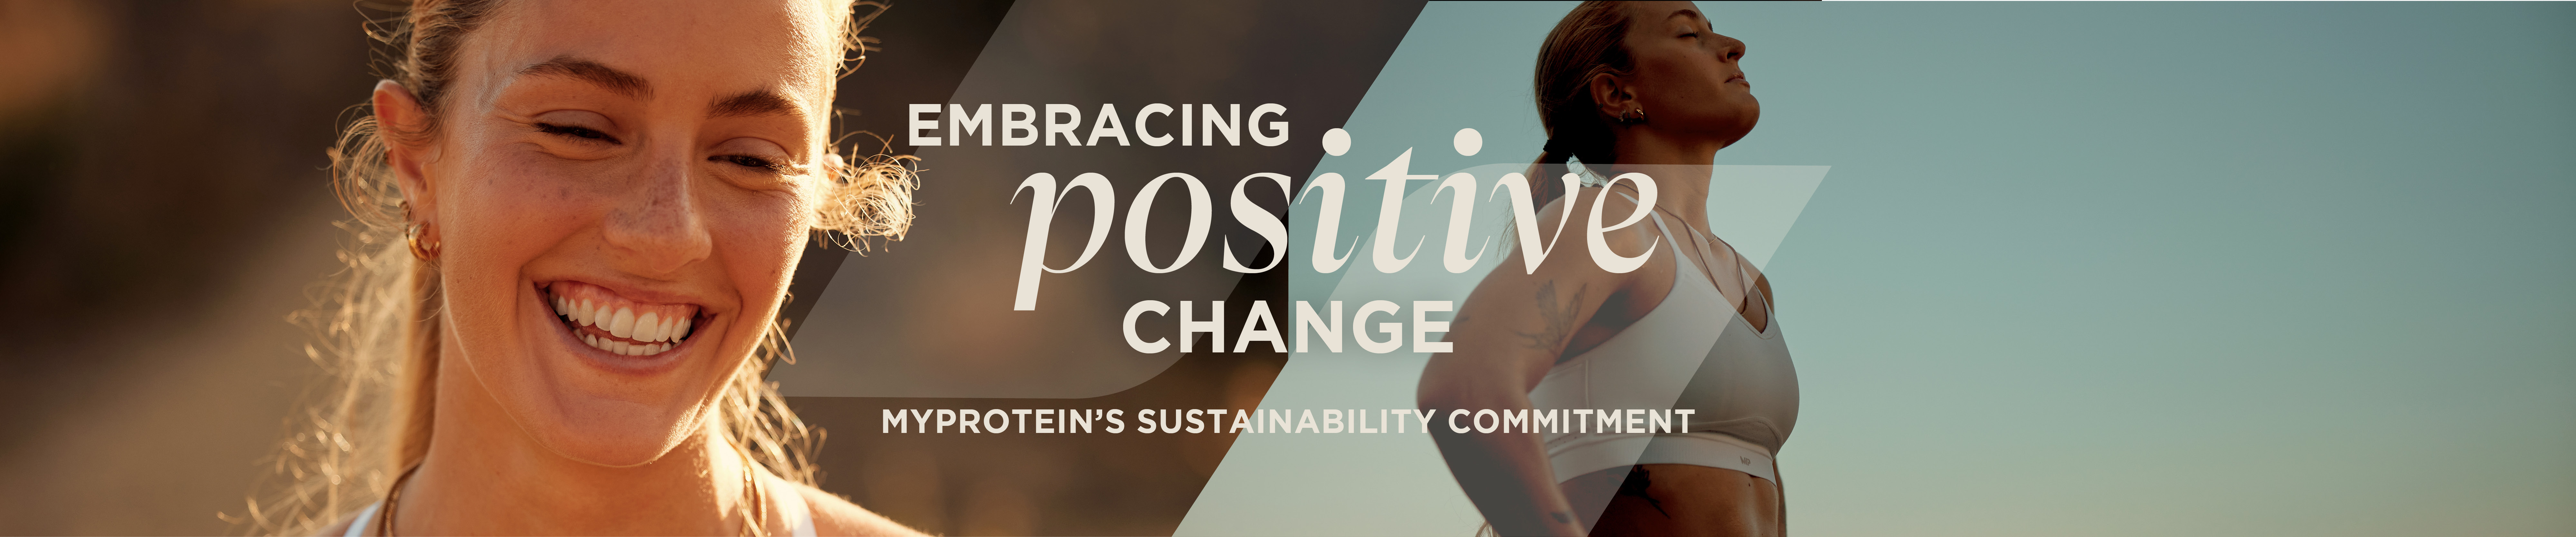 Embracing positive change, Myproteins sustainability commitment